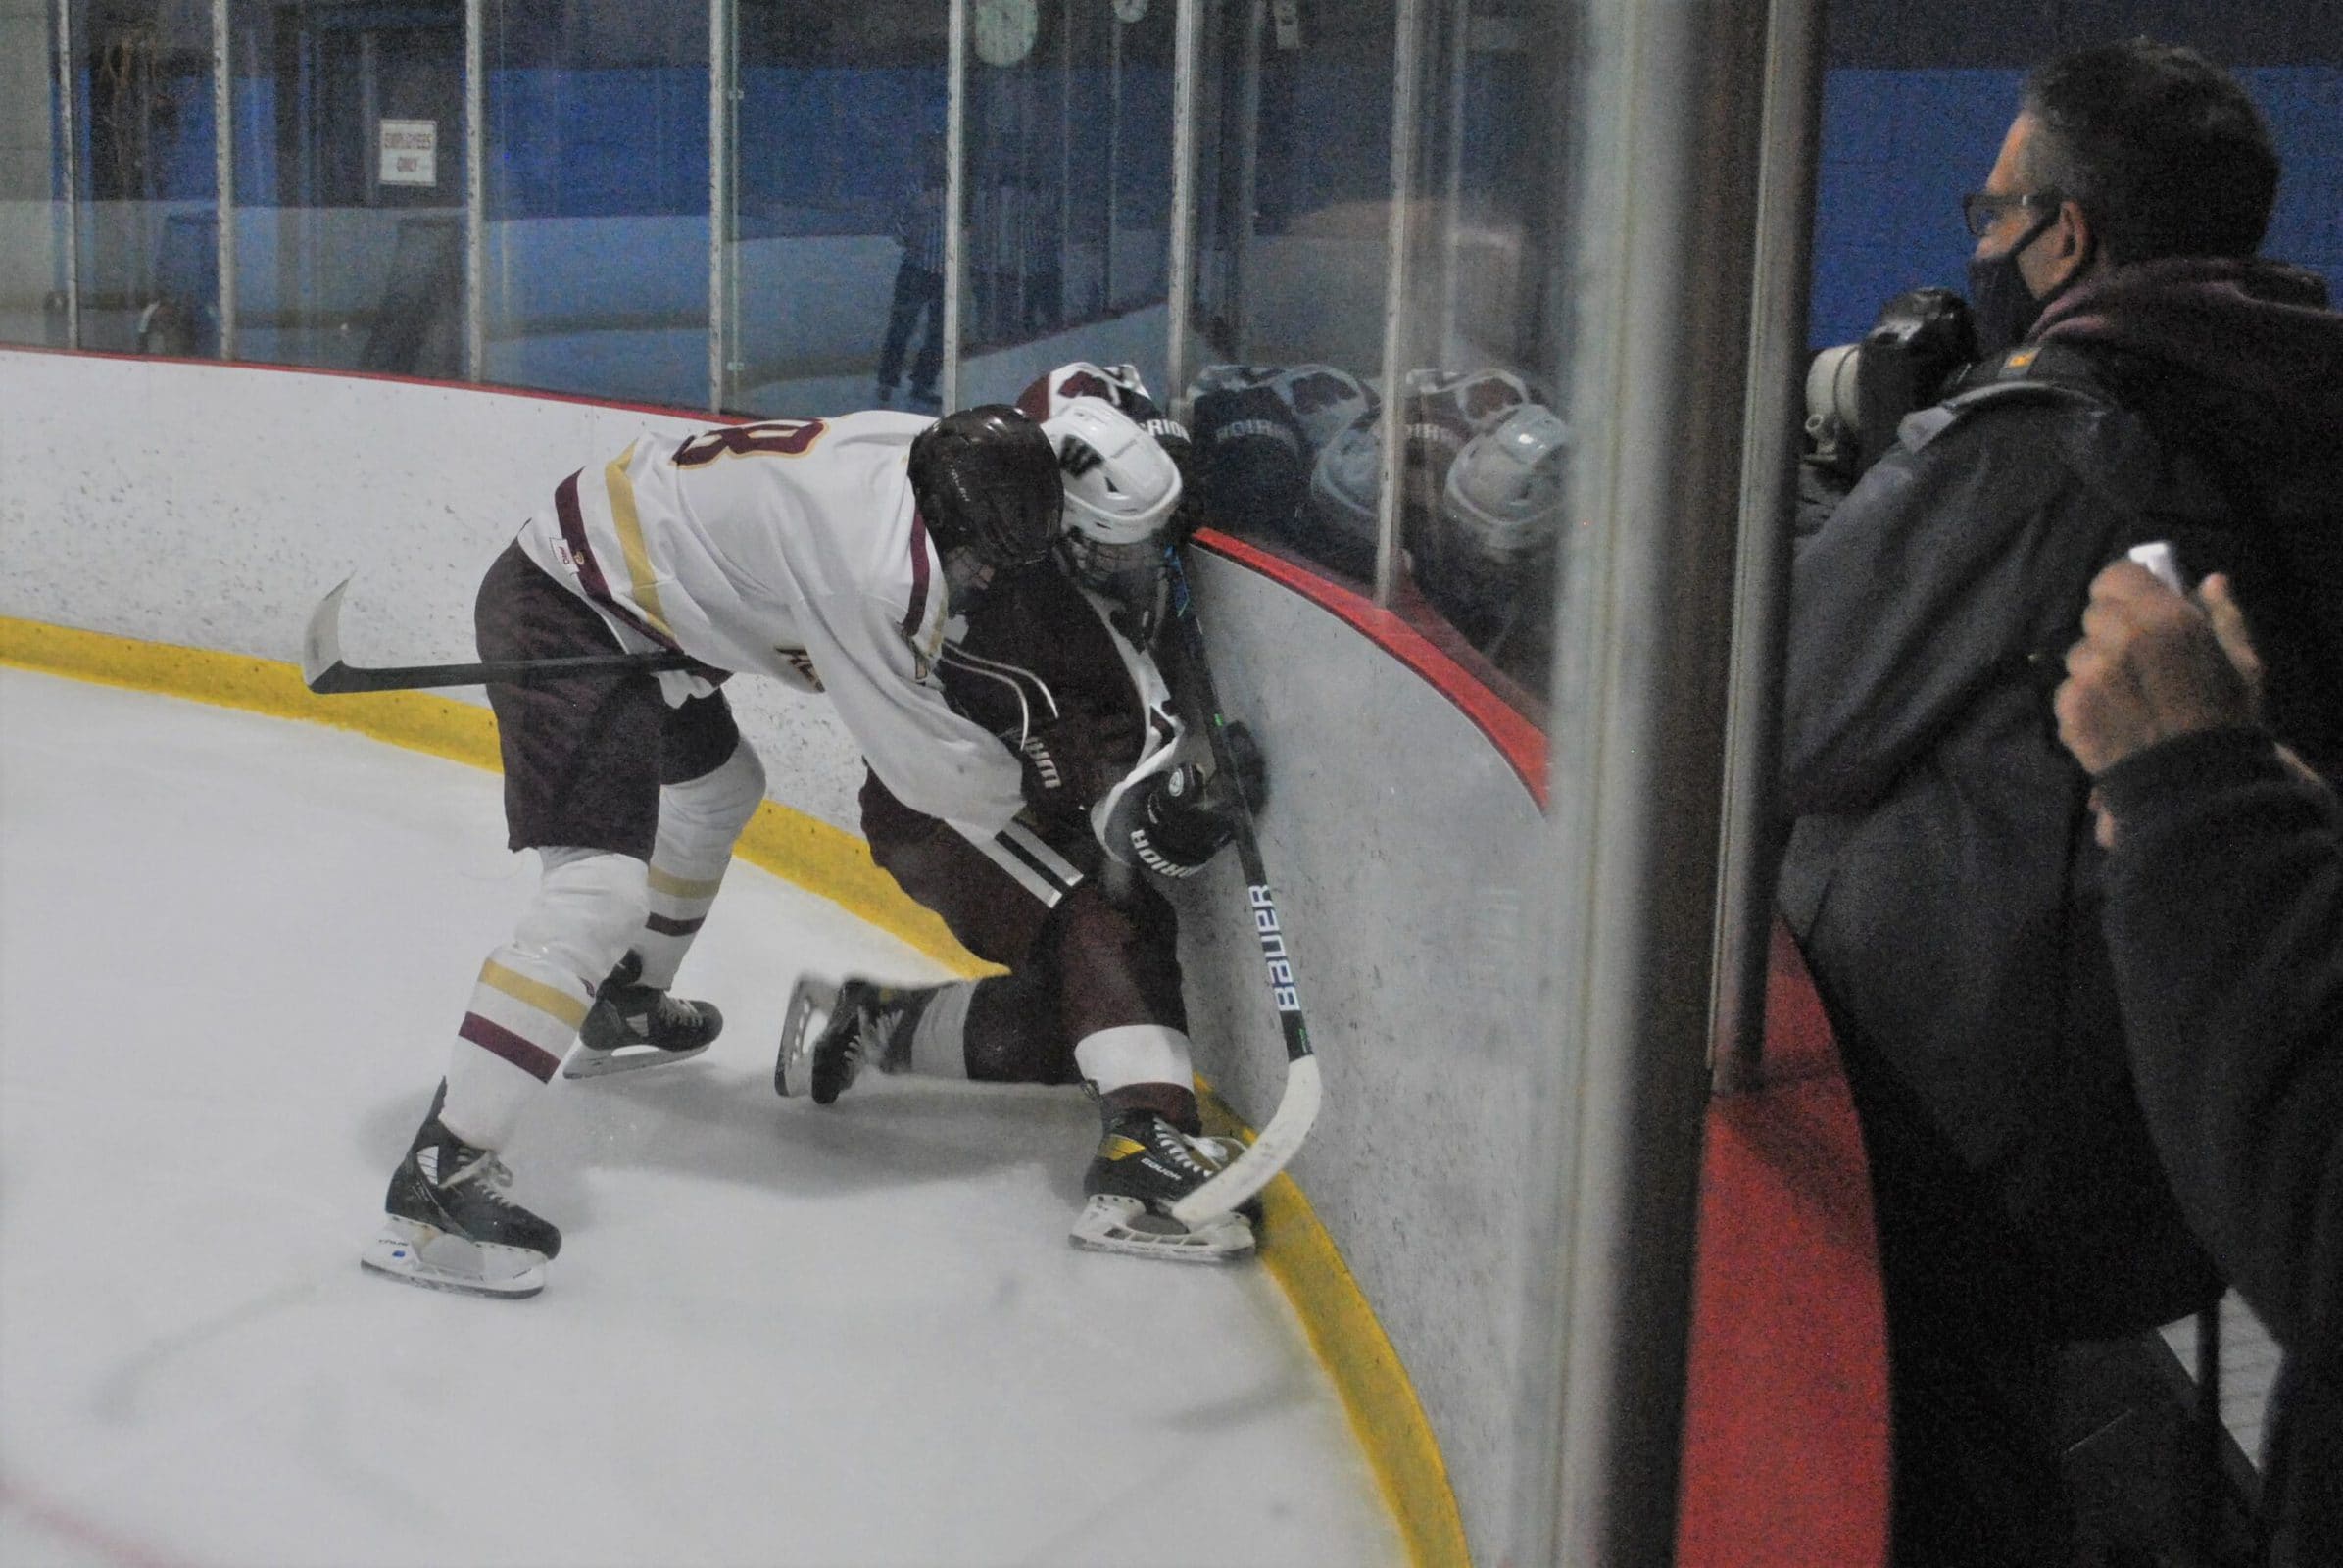 Algonquin boys hockey advances to Borough’s Cup championship with win over Westborough